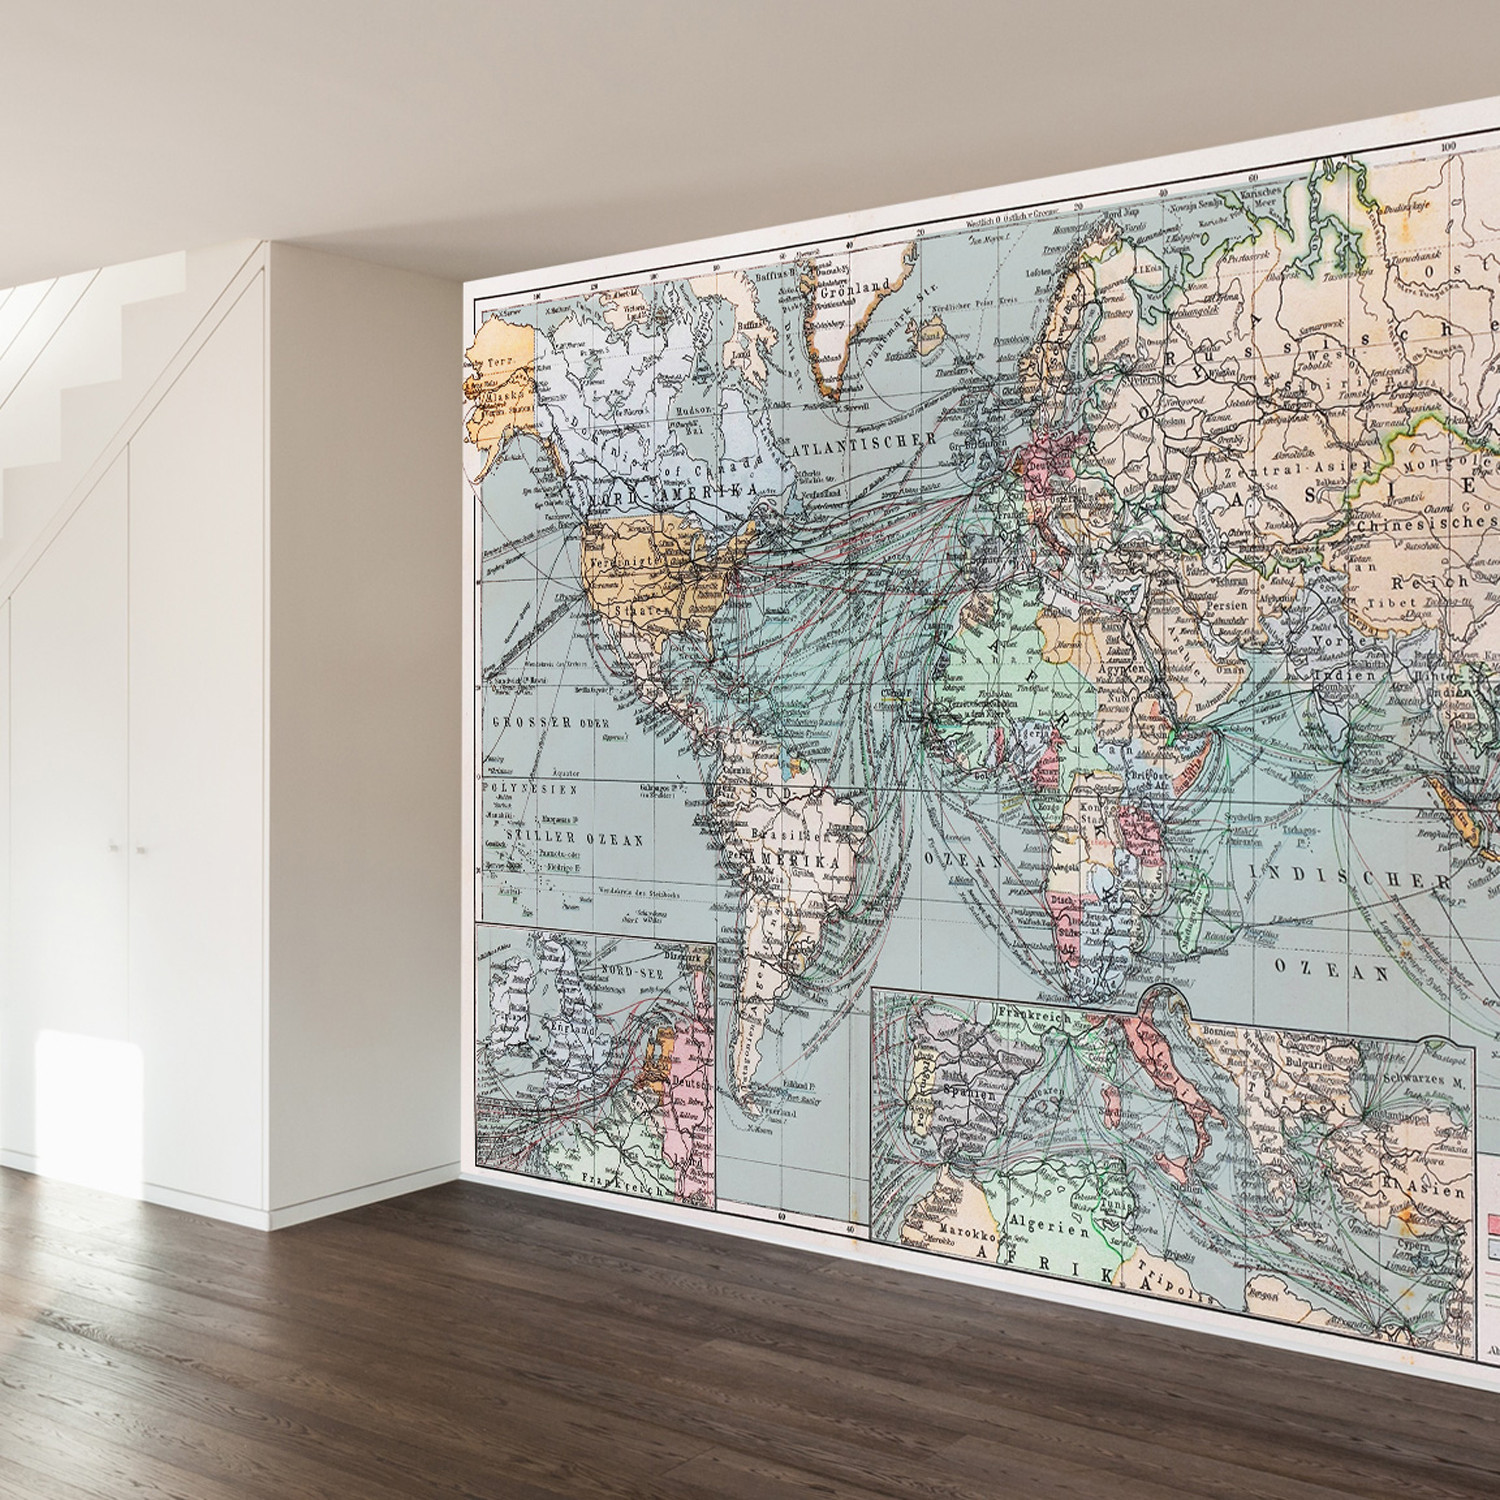 Vintage World Map Wall Mural Decal 100"L X 100"W Walls